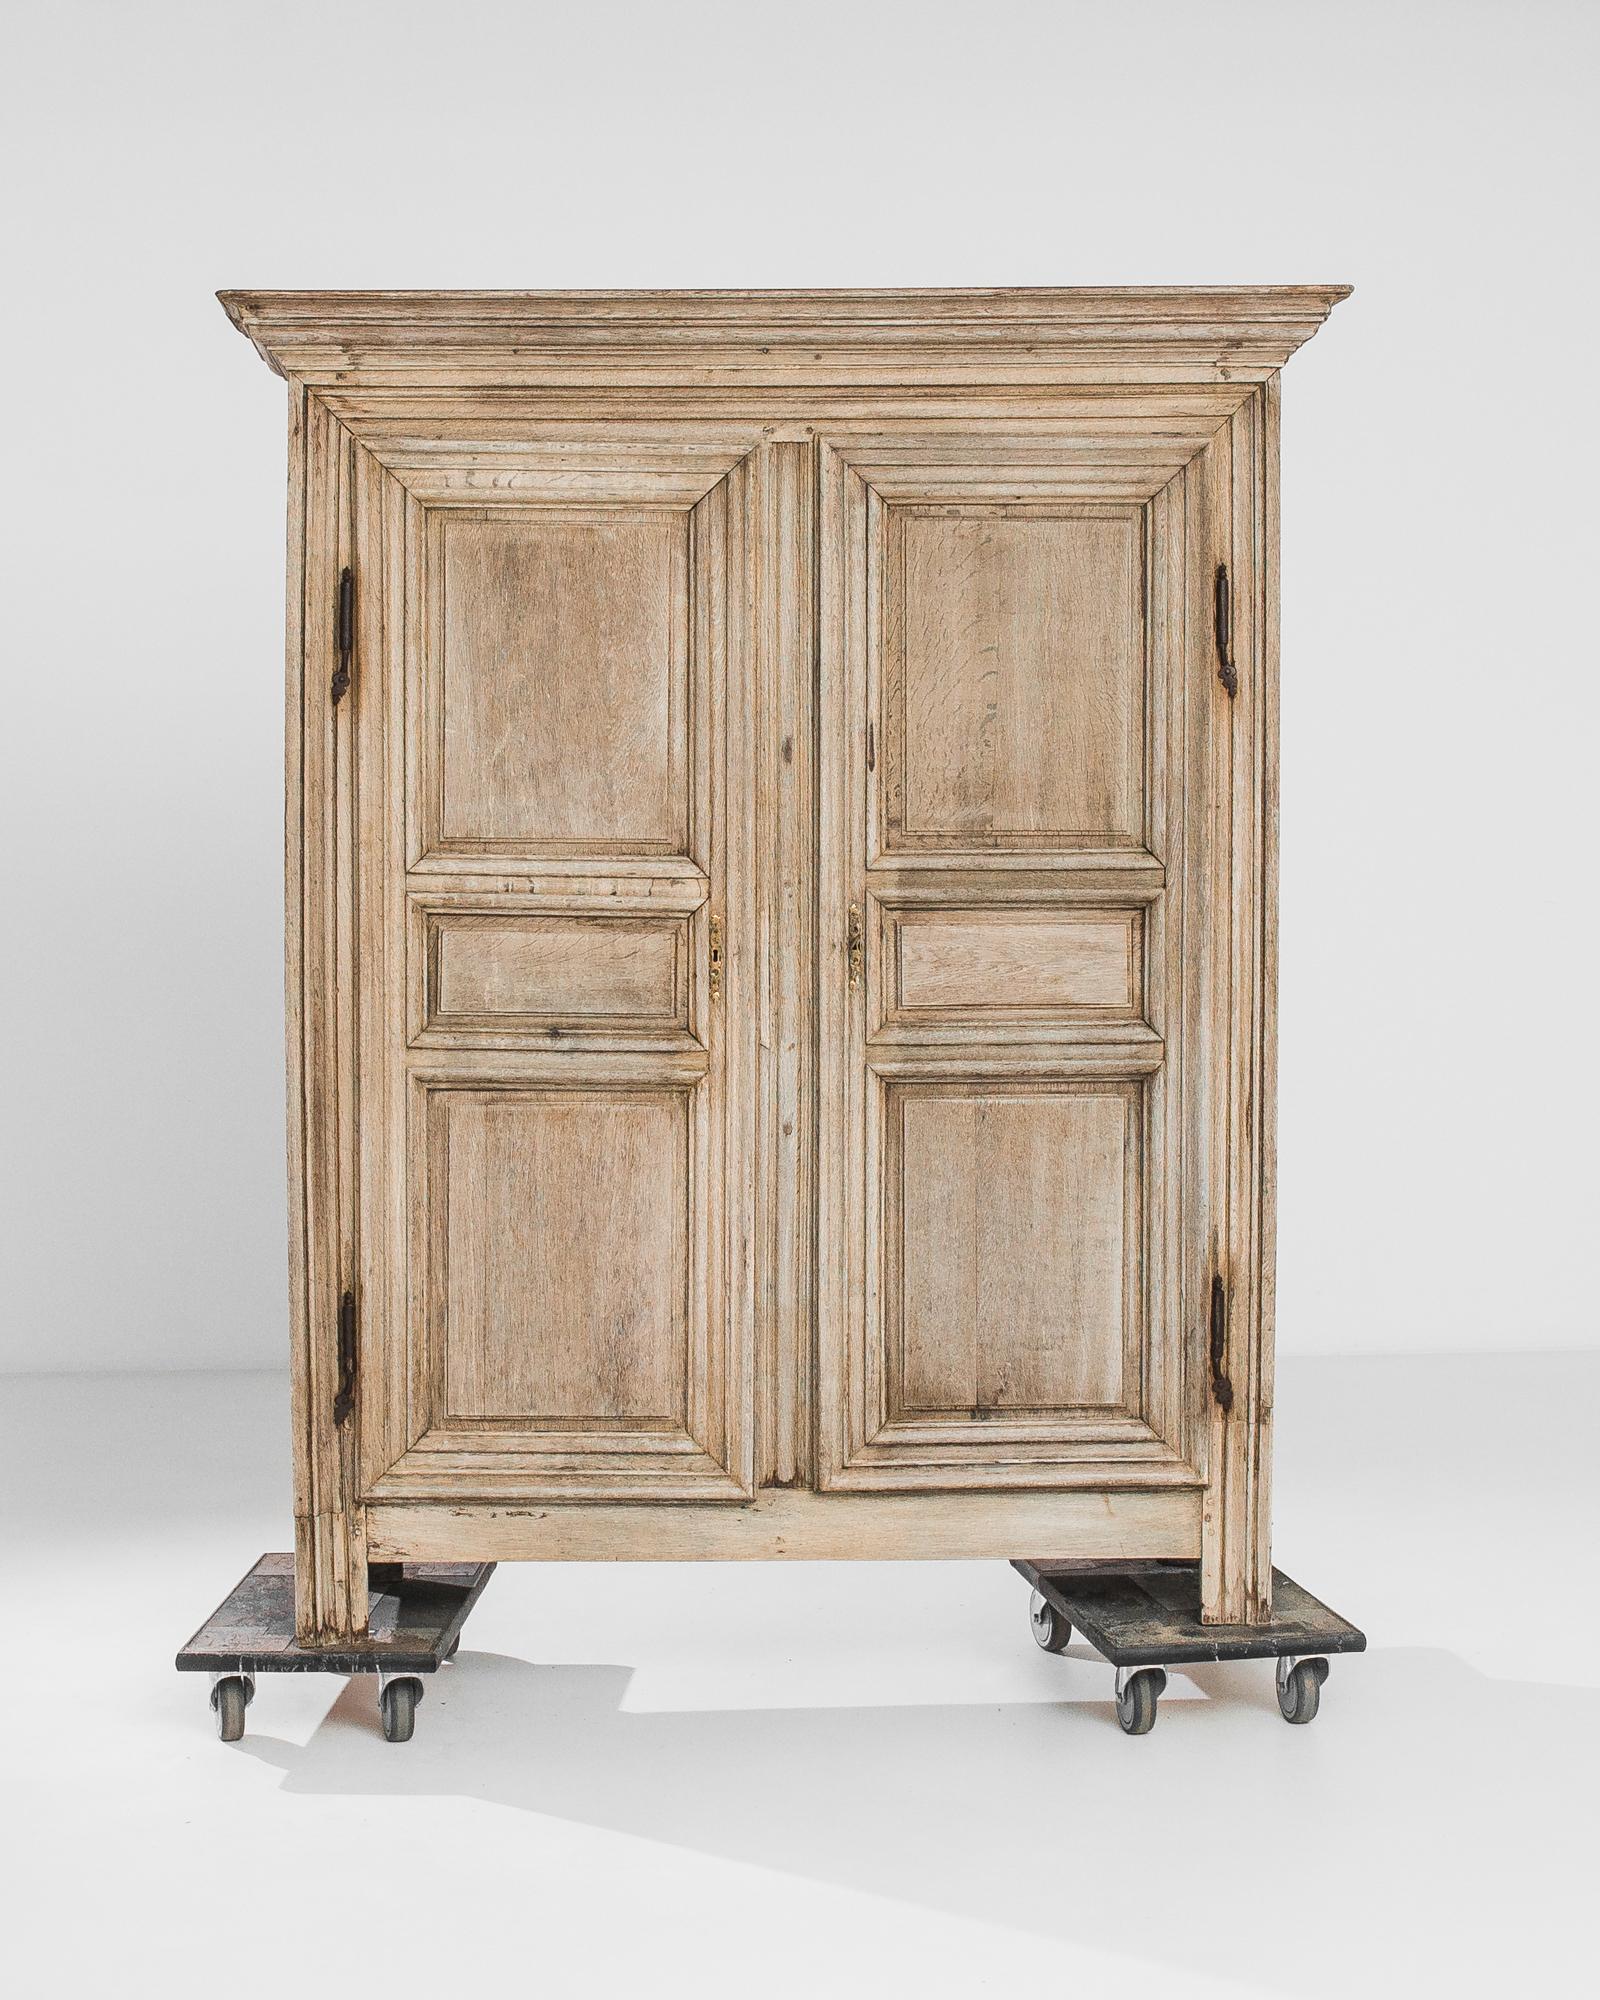 A bleached oak cabinet from France, produced circa 1800. An expertly crafted antique from the epoch that spawned the French empire, featuring a three shelf cabinet behind locking double doors. With a cornice like the wings of an omega, this stately